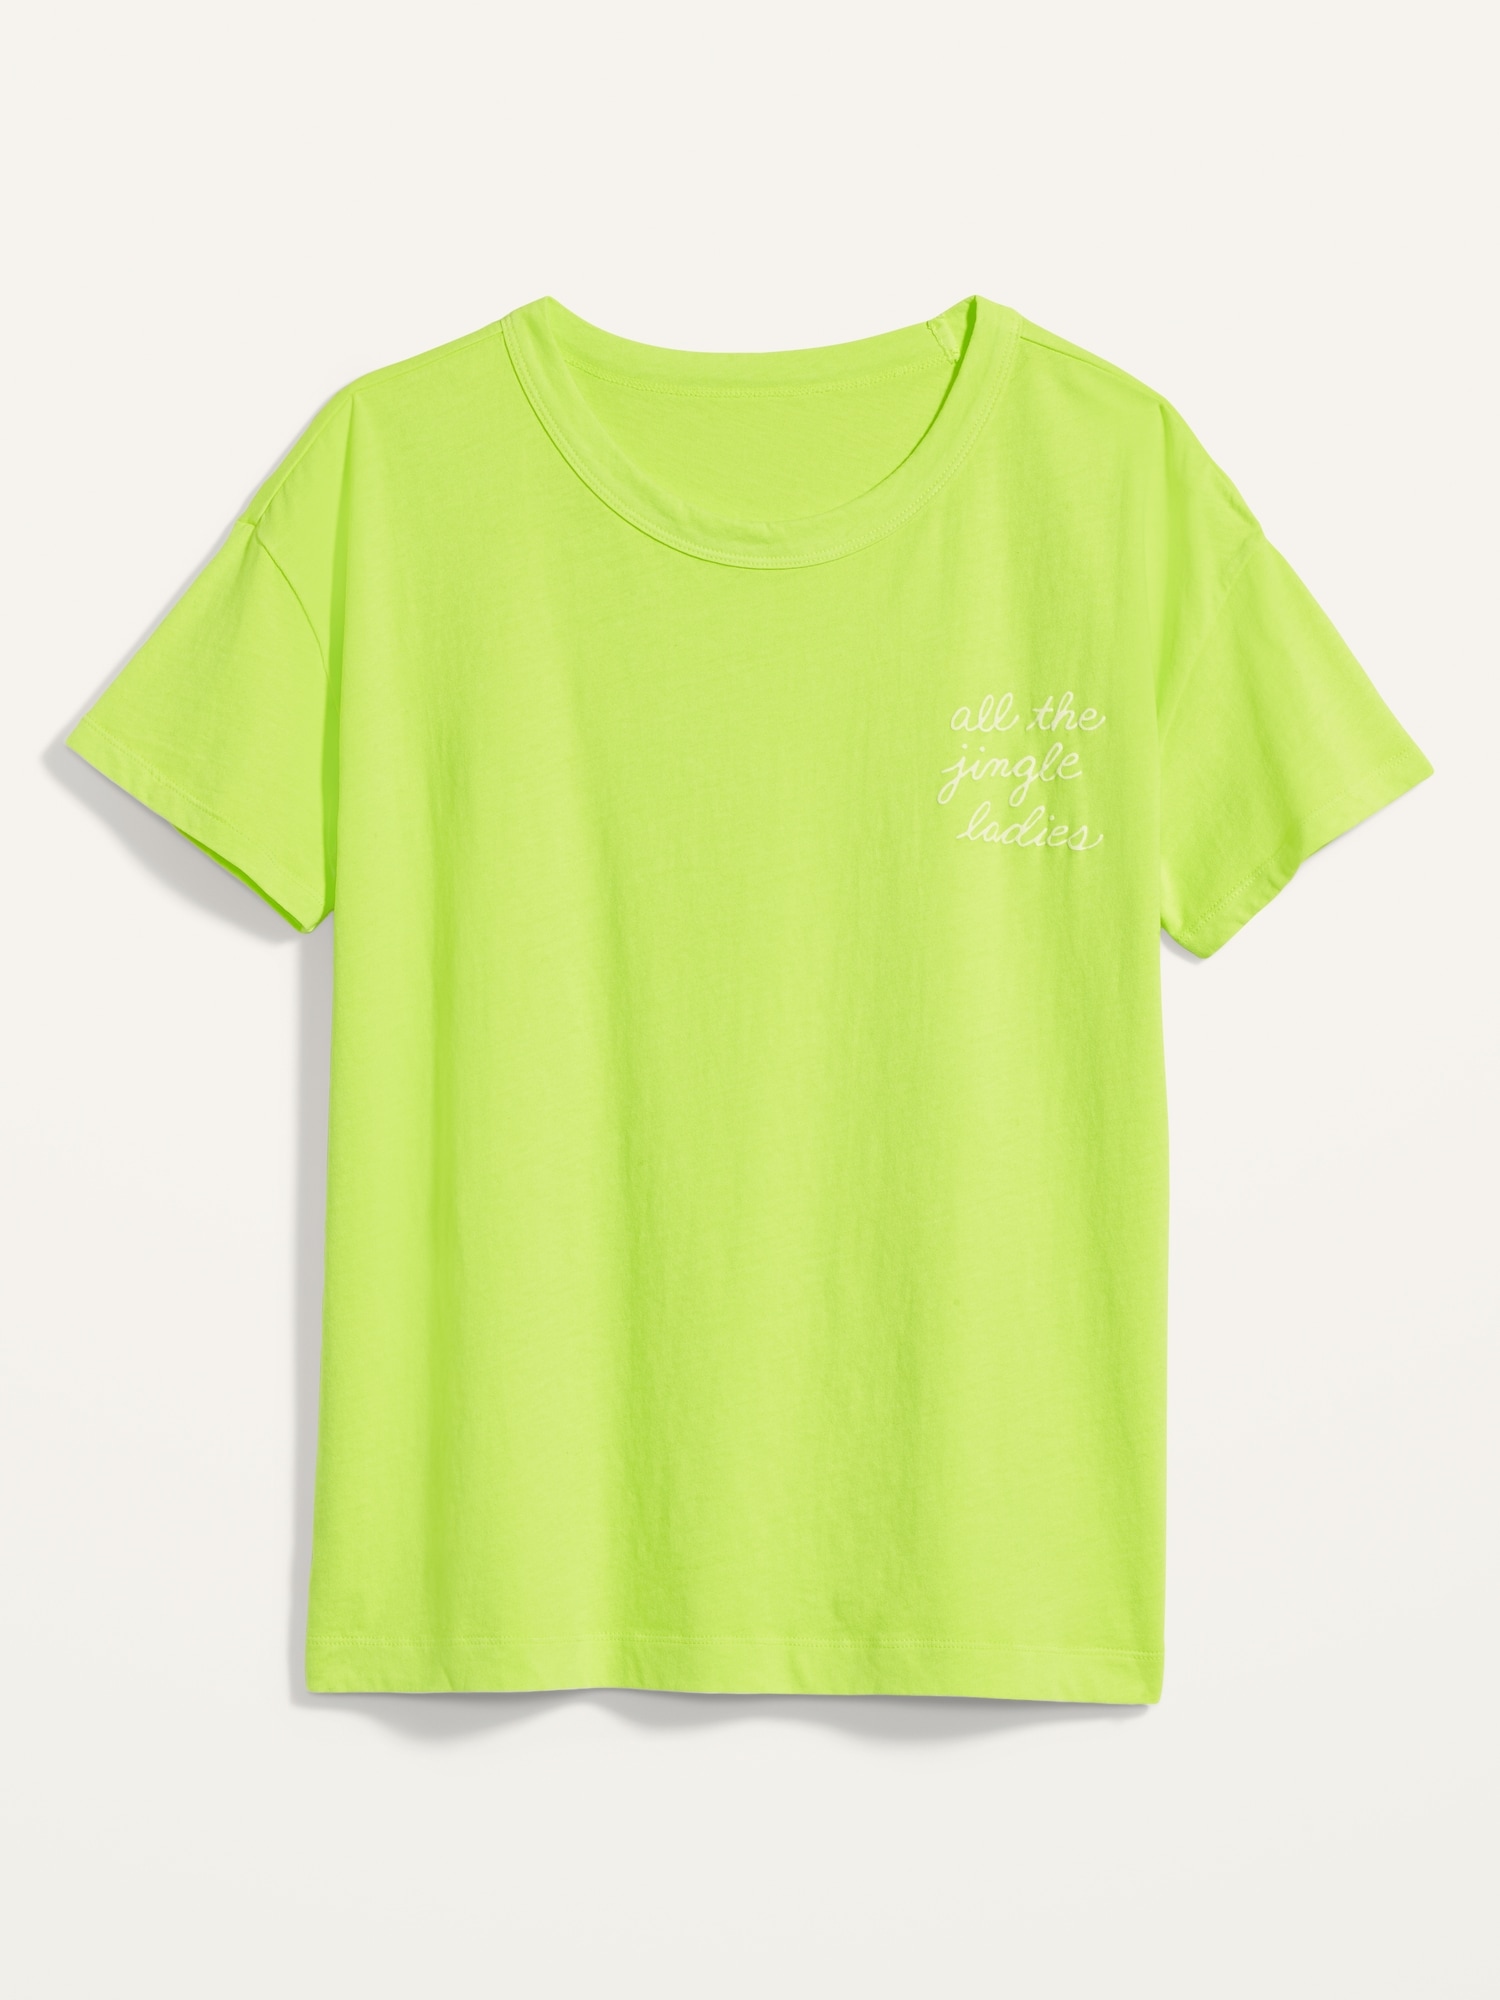 Loose-Fit Christmas Graphic Easy Tee for Women | Old Navy